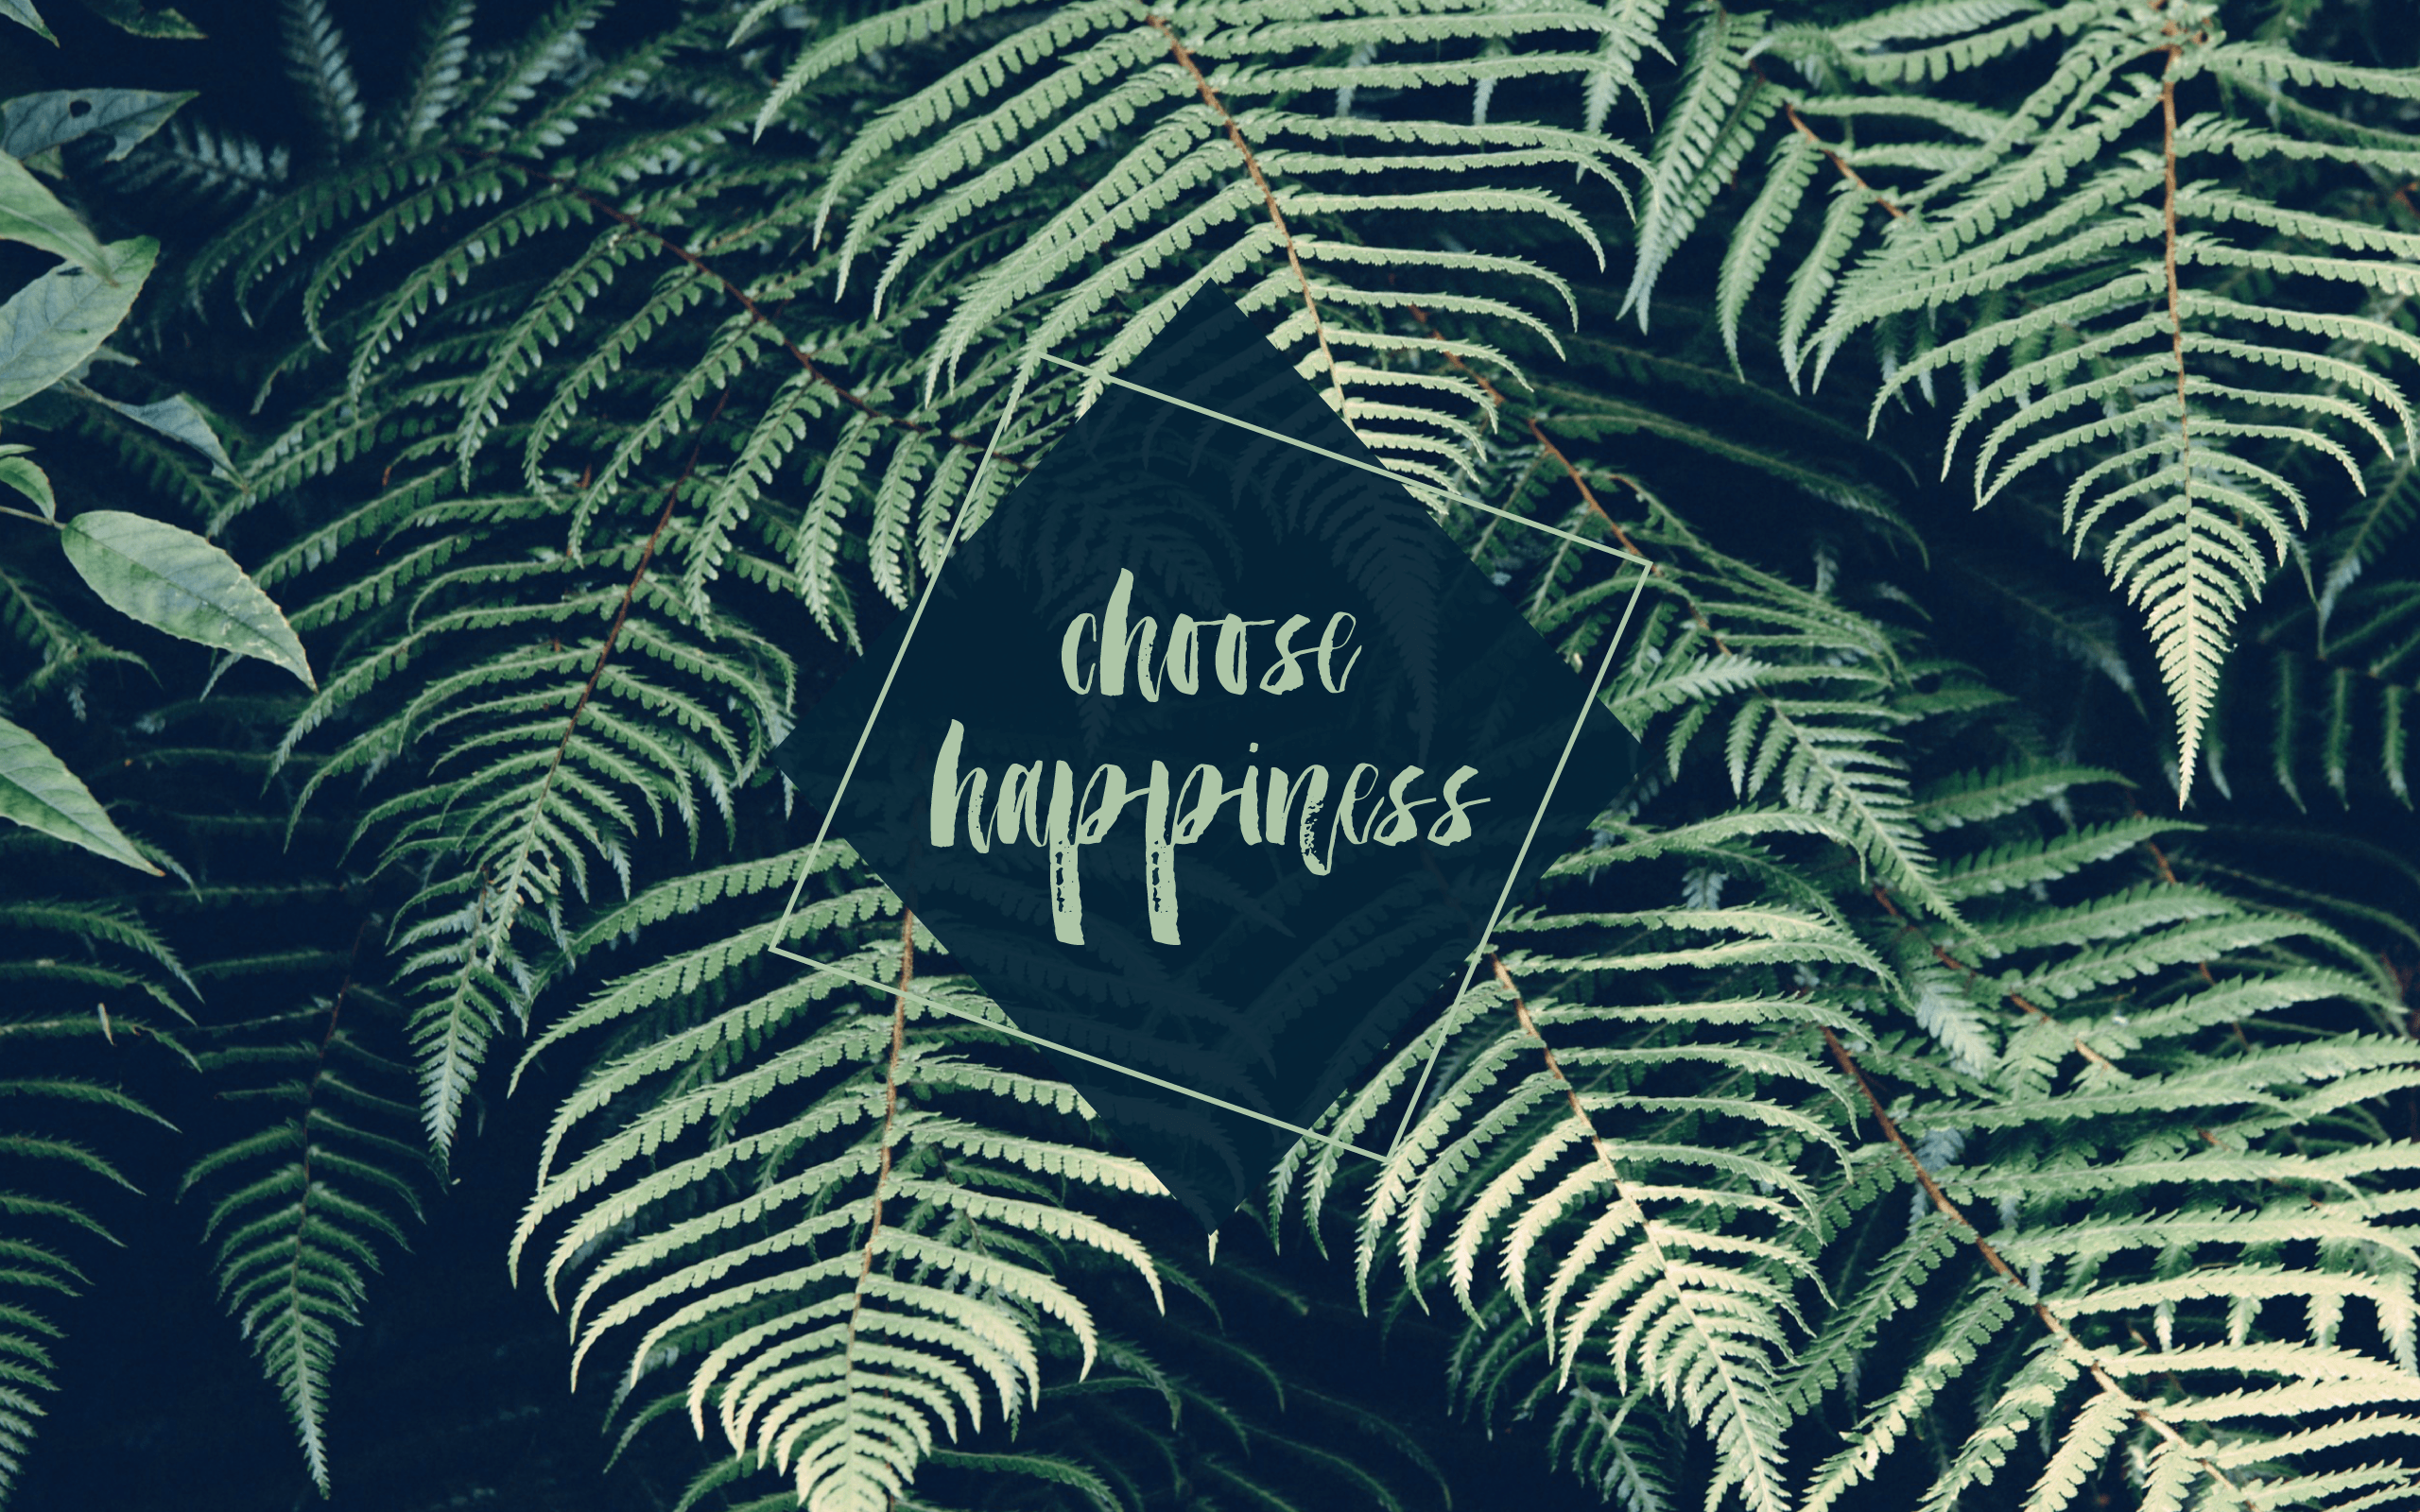 Choose happiness quote on a background of green fern leaves - IMac, tropical